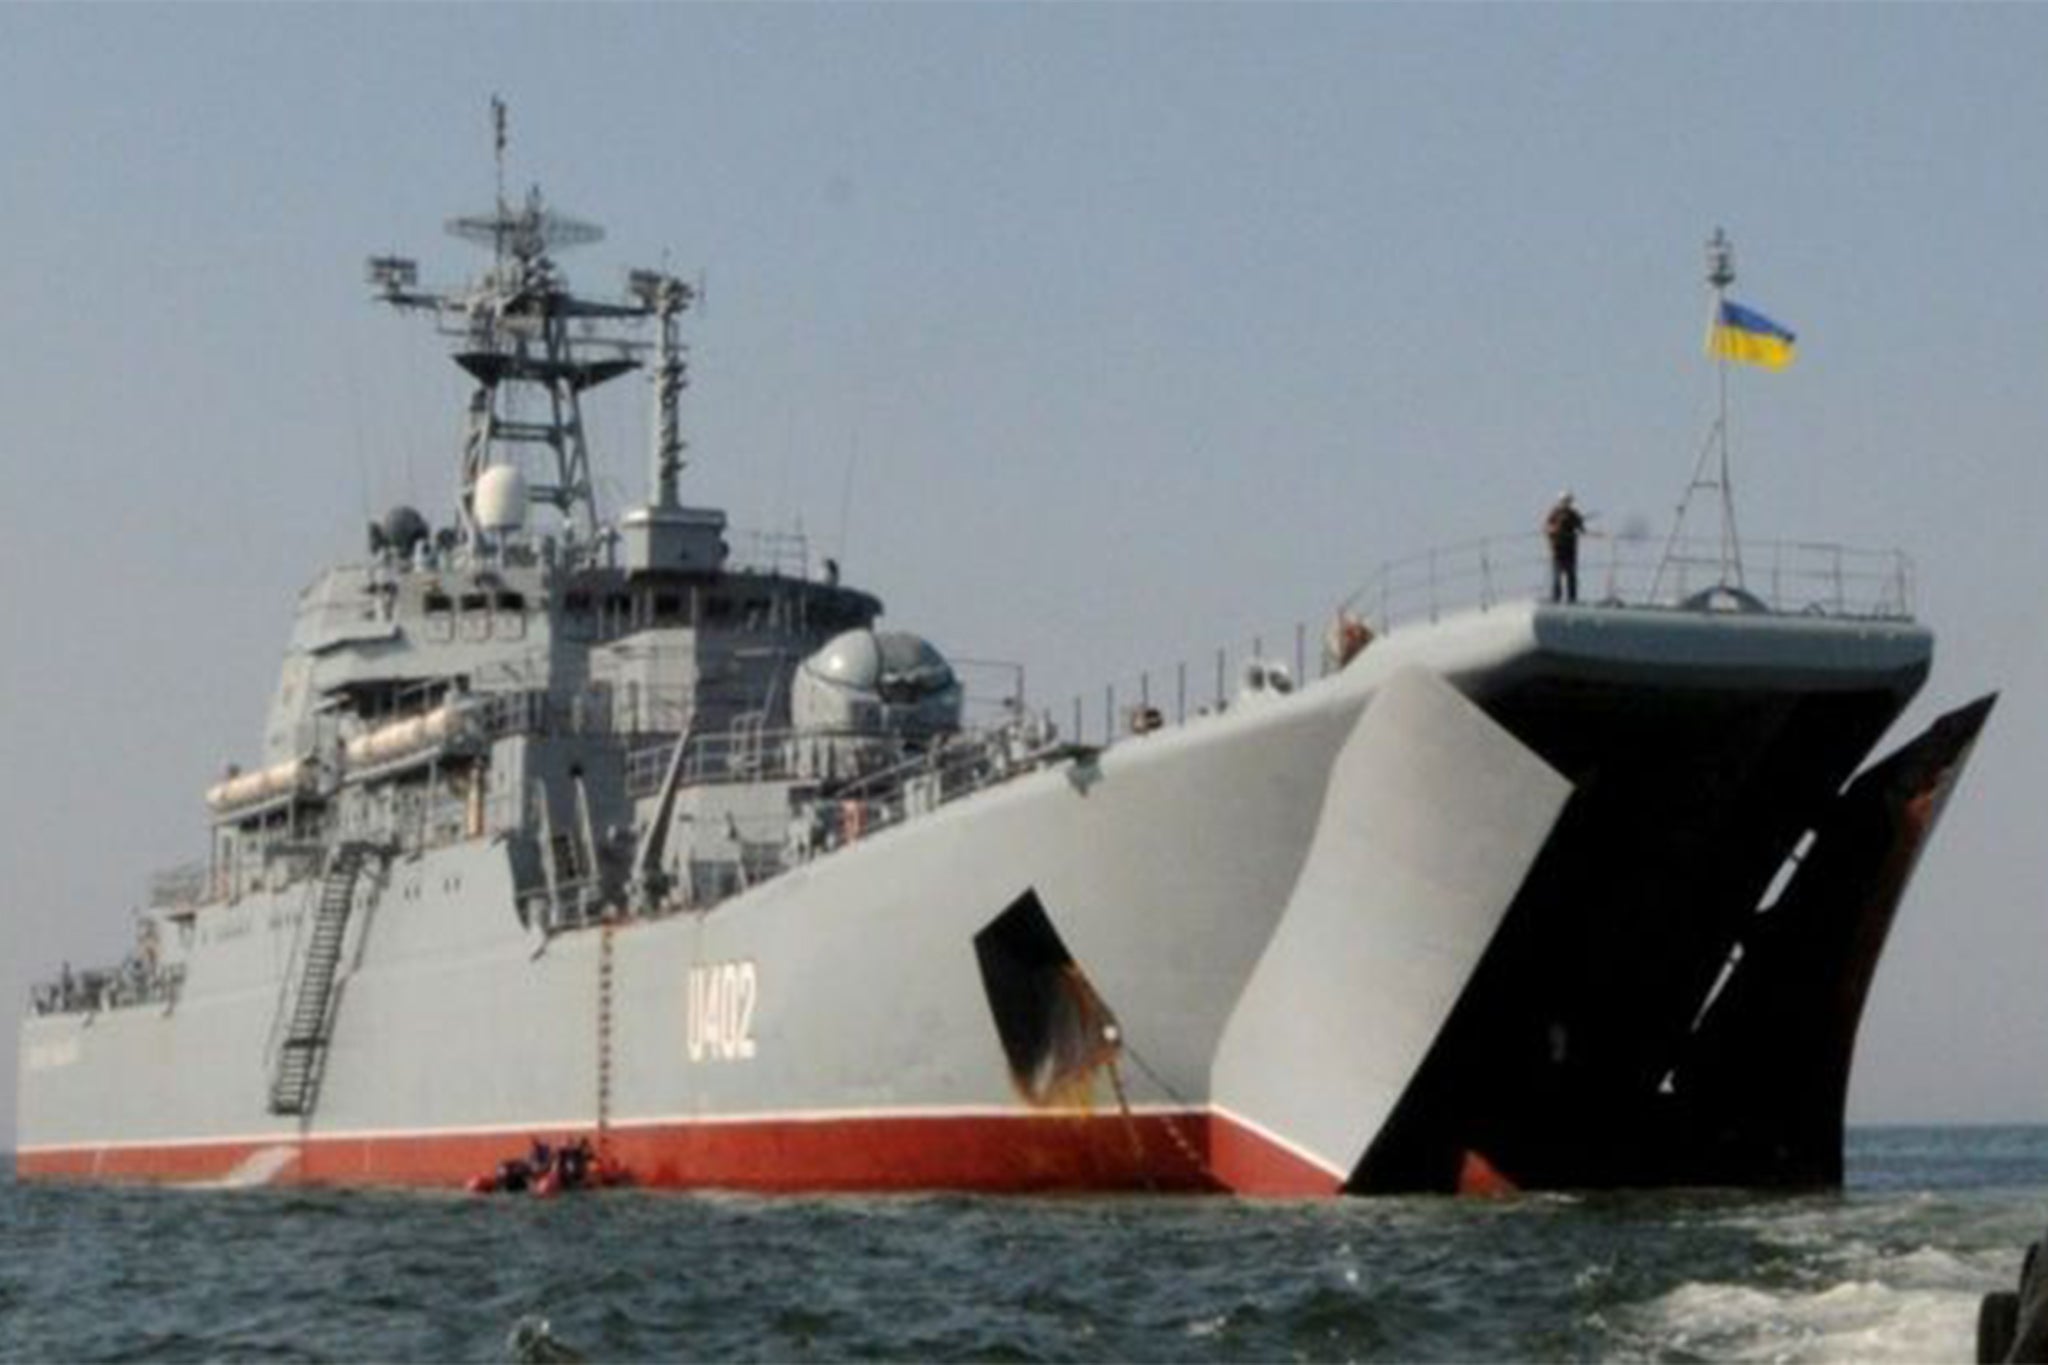 The Ukrainian Armed Forces attacked the ship Konstantin Olshansky, seized by Russians in Crimea in 2014